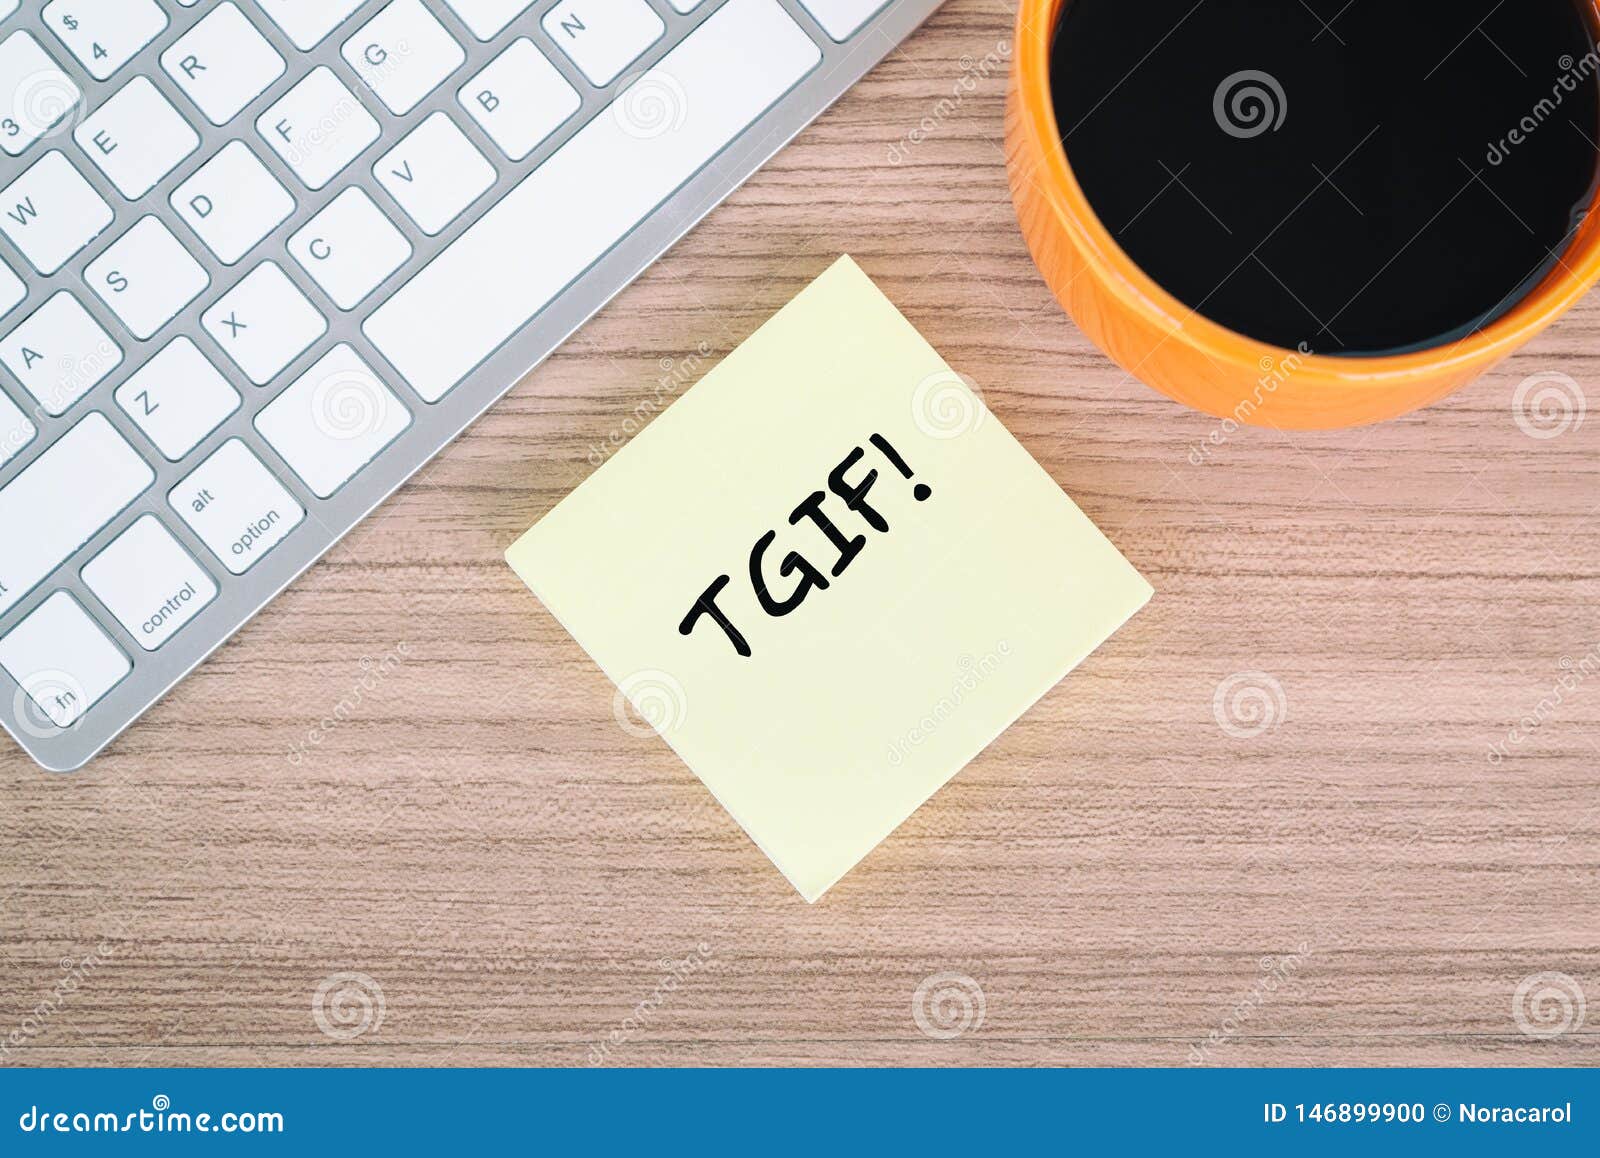 thanks god its friday tgif quote on memo